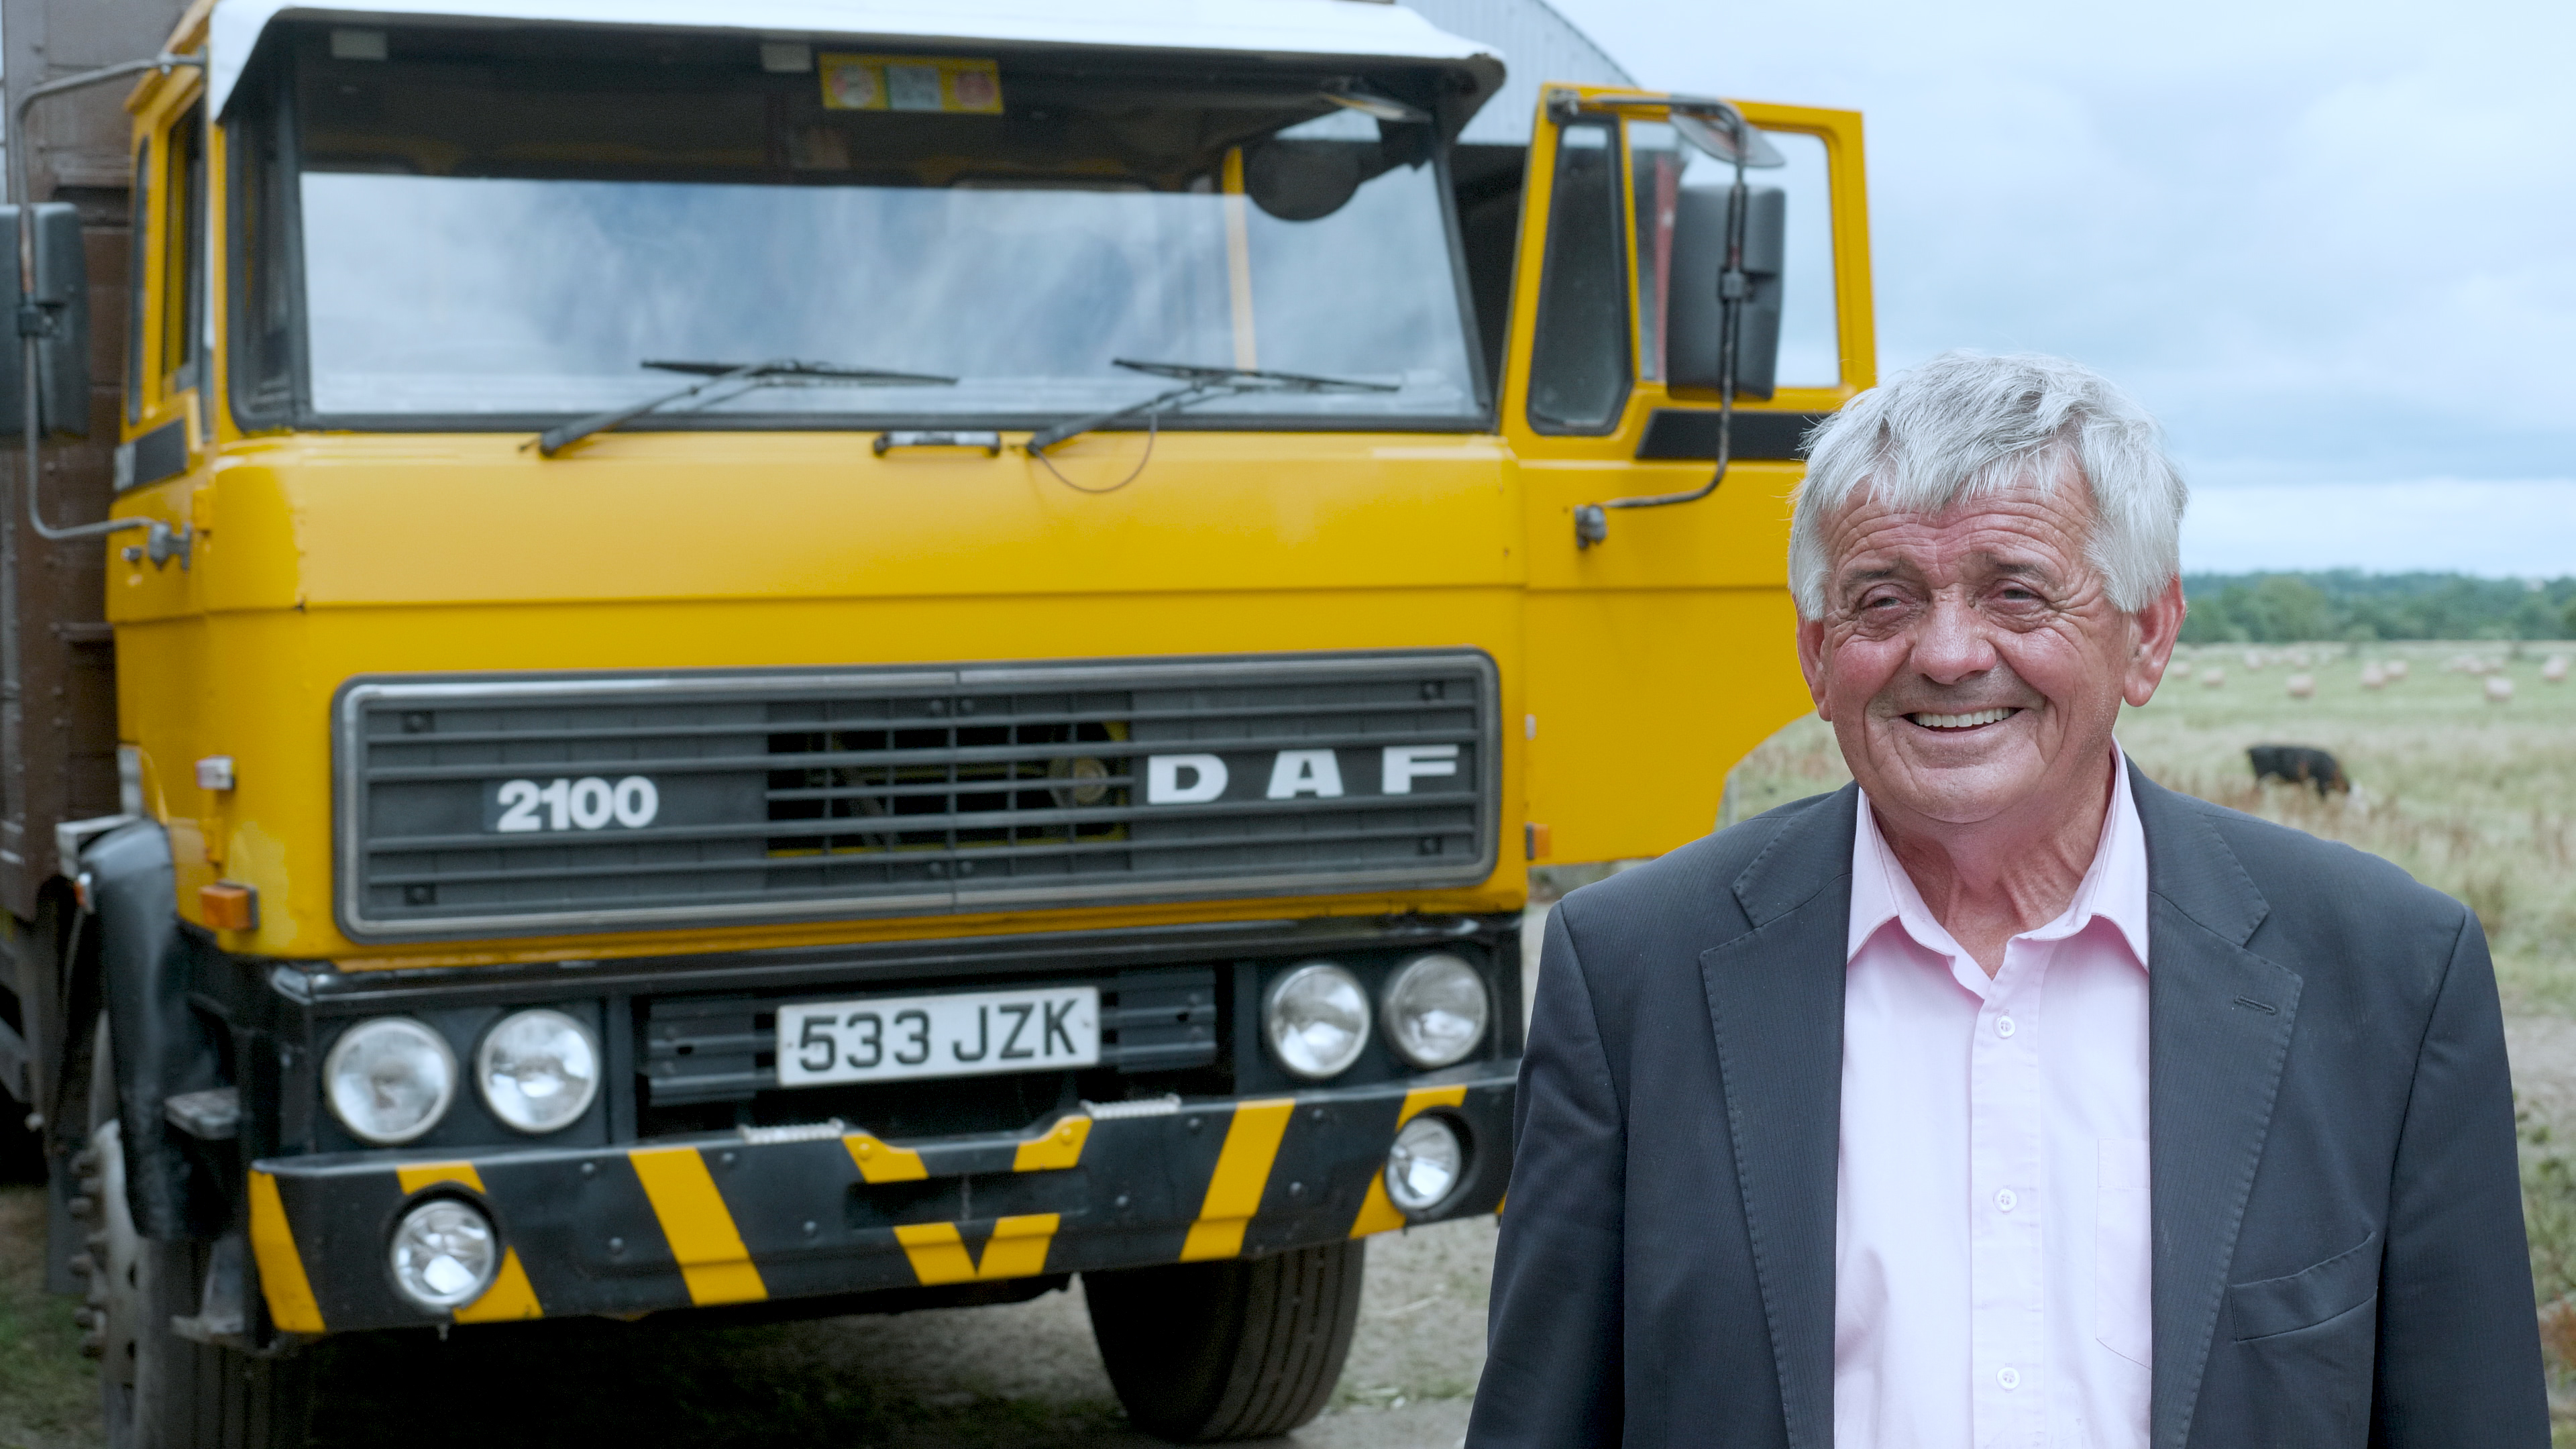 Irishman John Tarrent in front of his DAF 2100 which he purchased back in 1984 and which is still in operation.